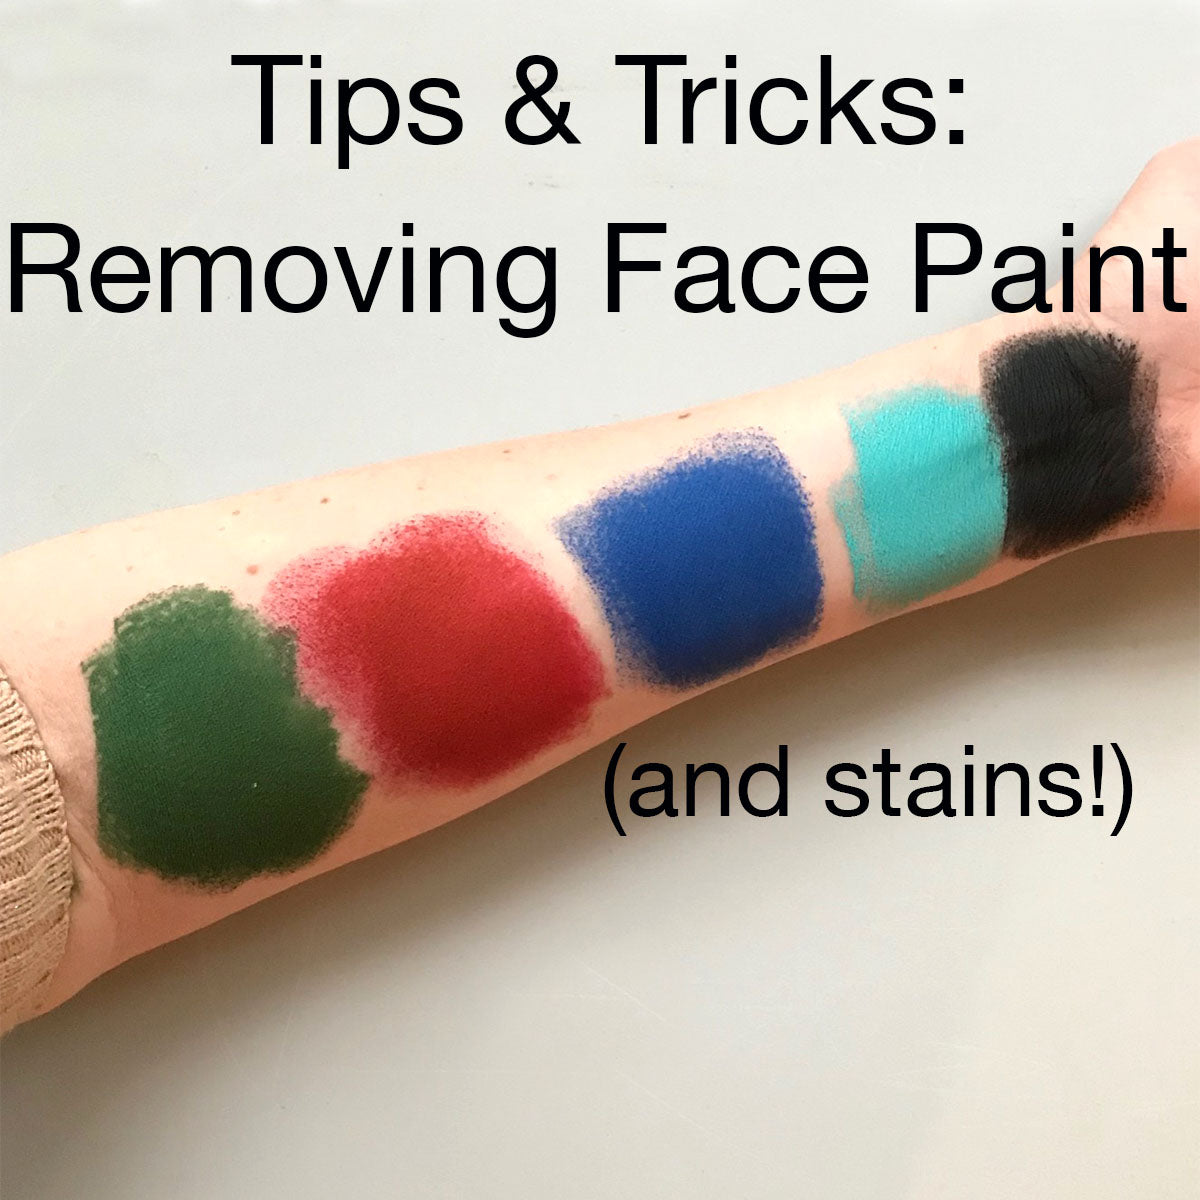 How to Remove Halloween Face Paint or Makeup